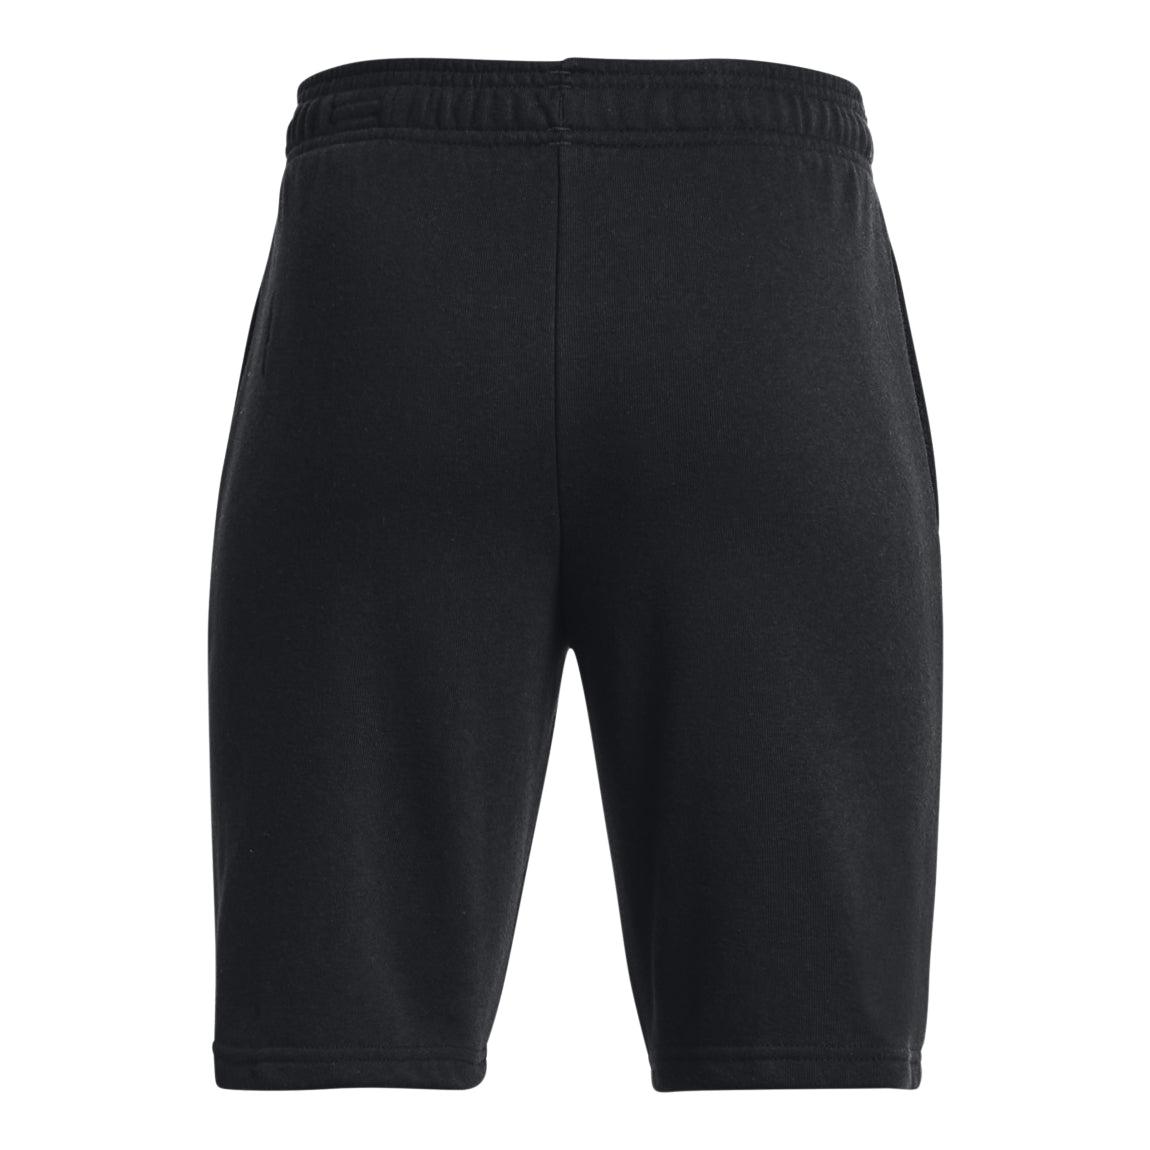 Under Armour Rival Terry Short - Boys - Sports Excellence